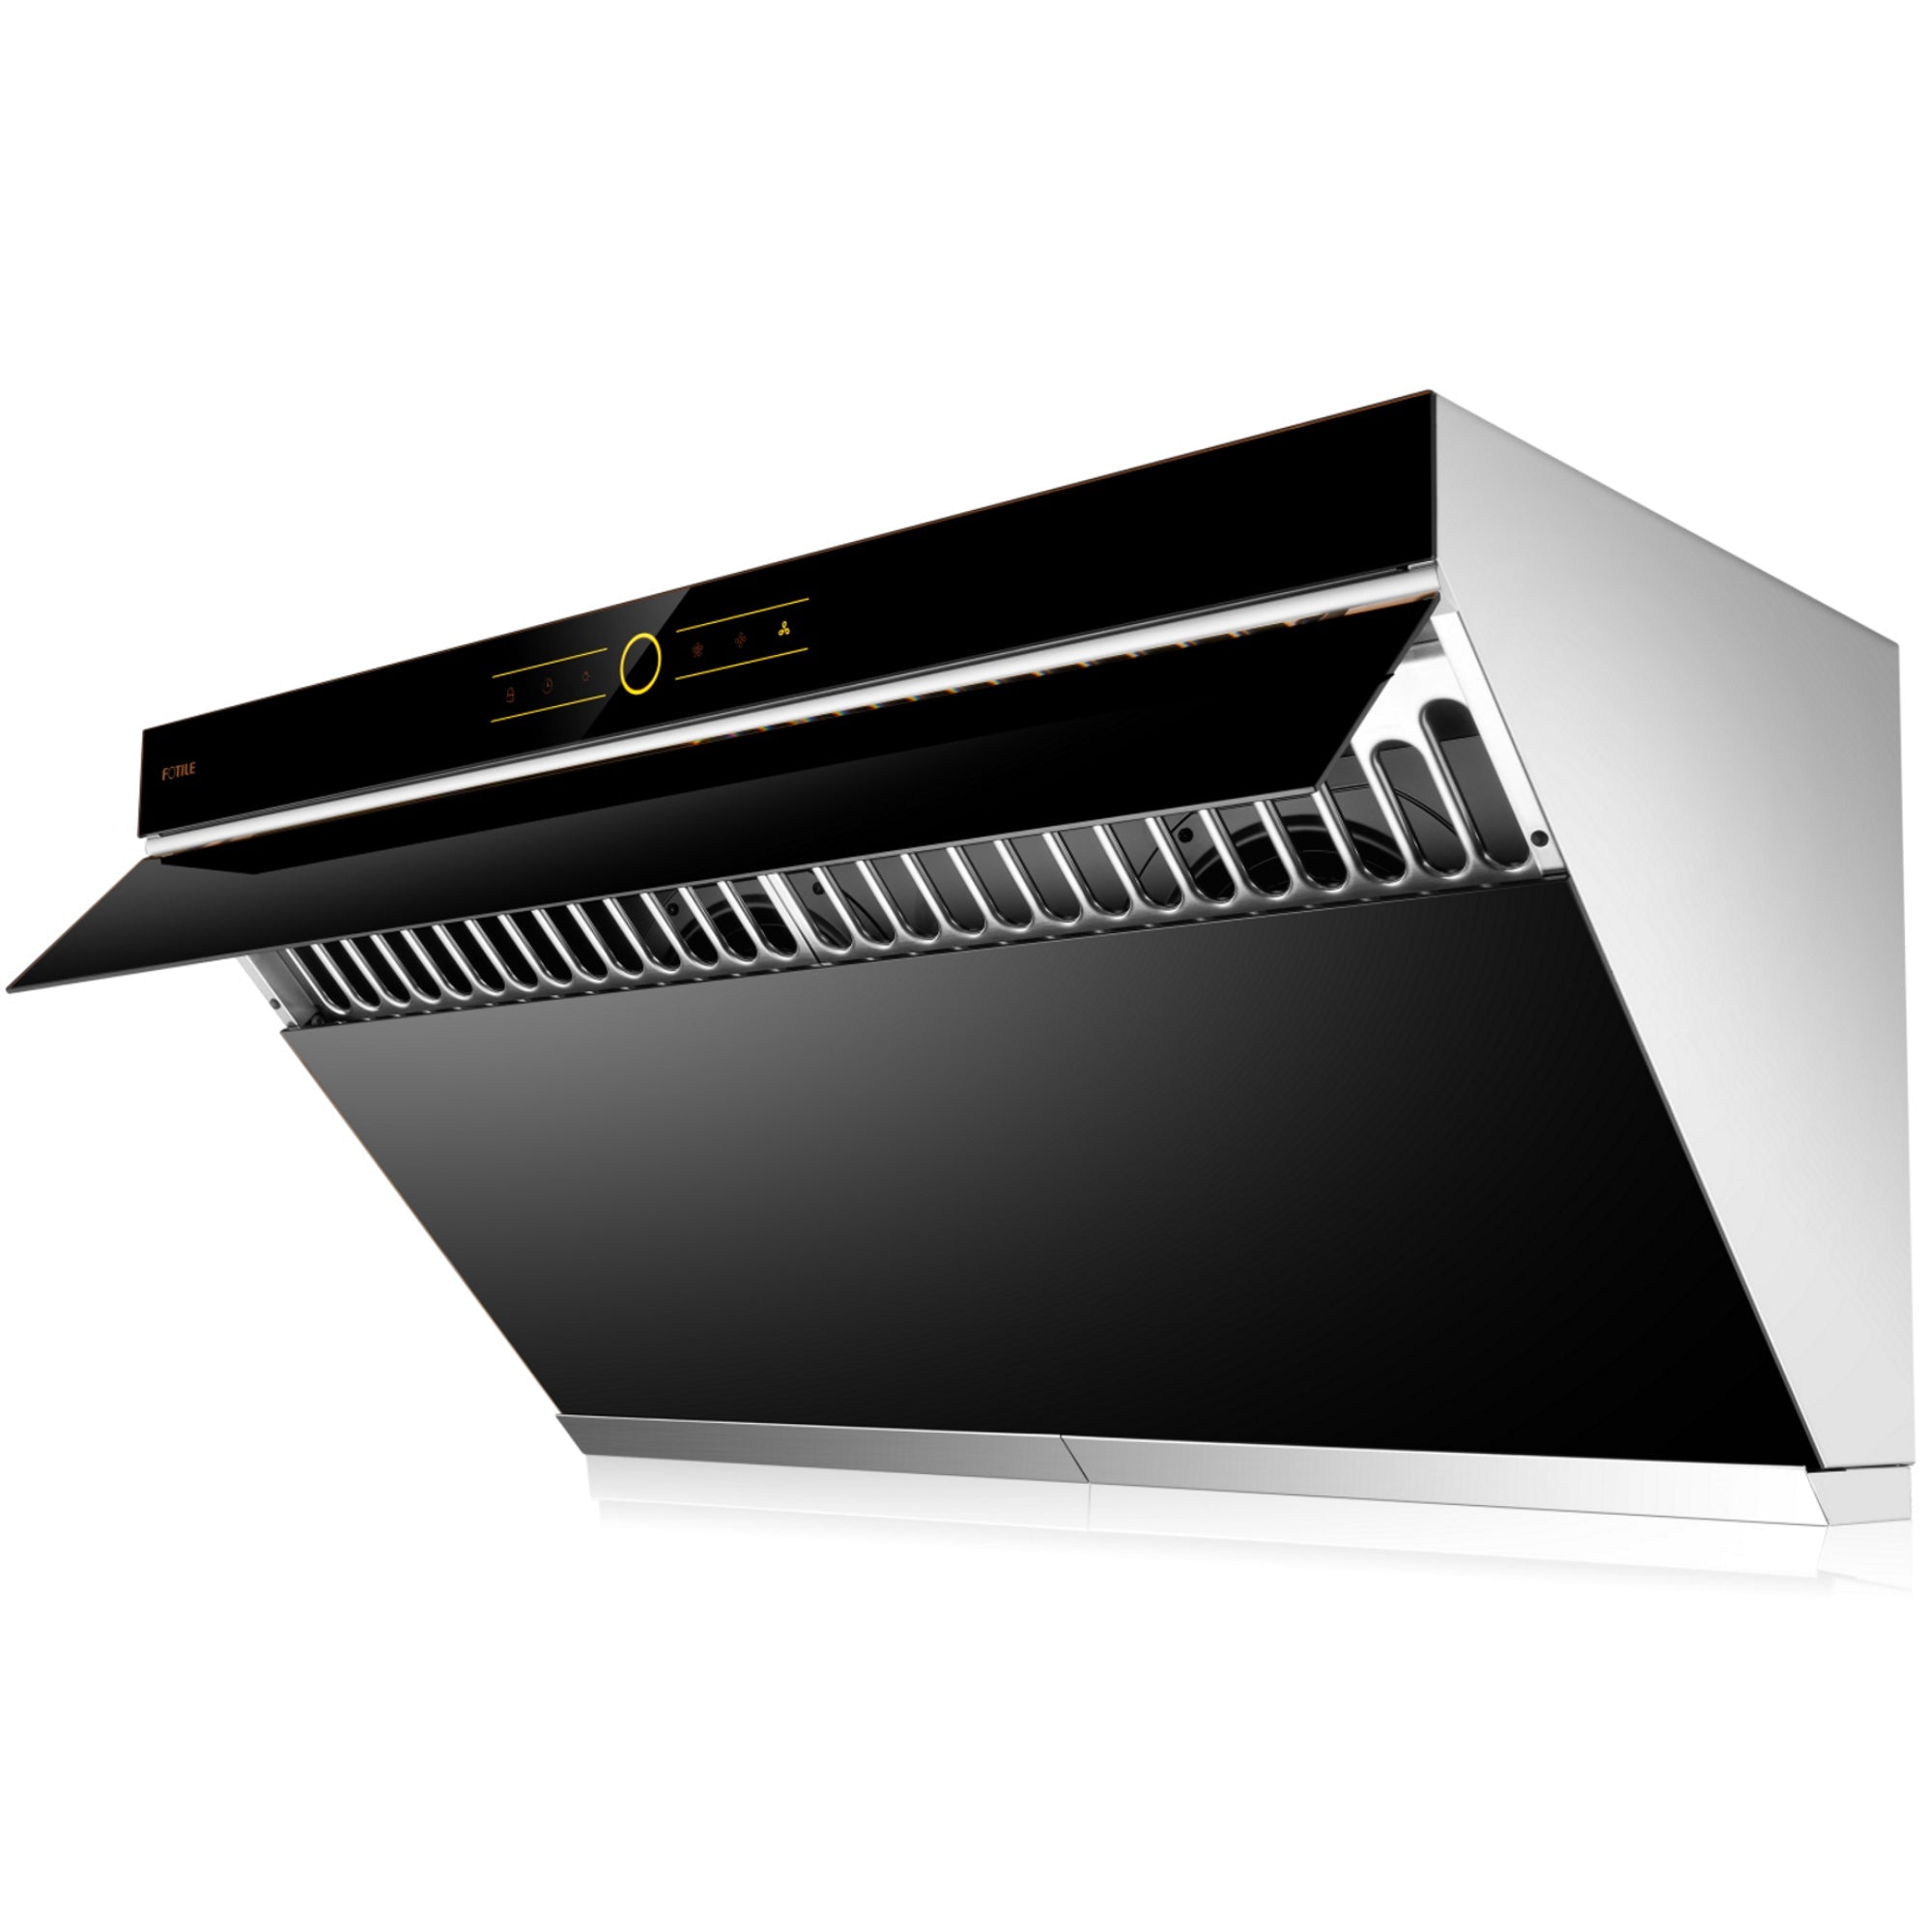 MUELLER 36 in. Deluxe 900CFM Wall Mount Range Hood, Open-Close Black  Tempered Glass Panel, LED Touch Control, Permanent Filters MU-ORH - The  Home Depot